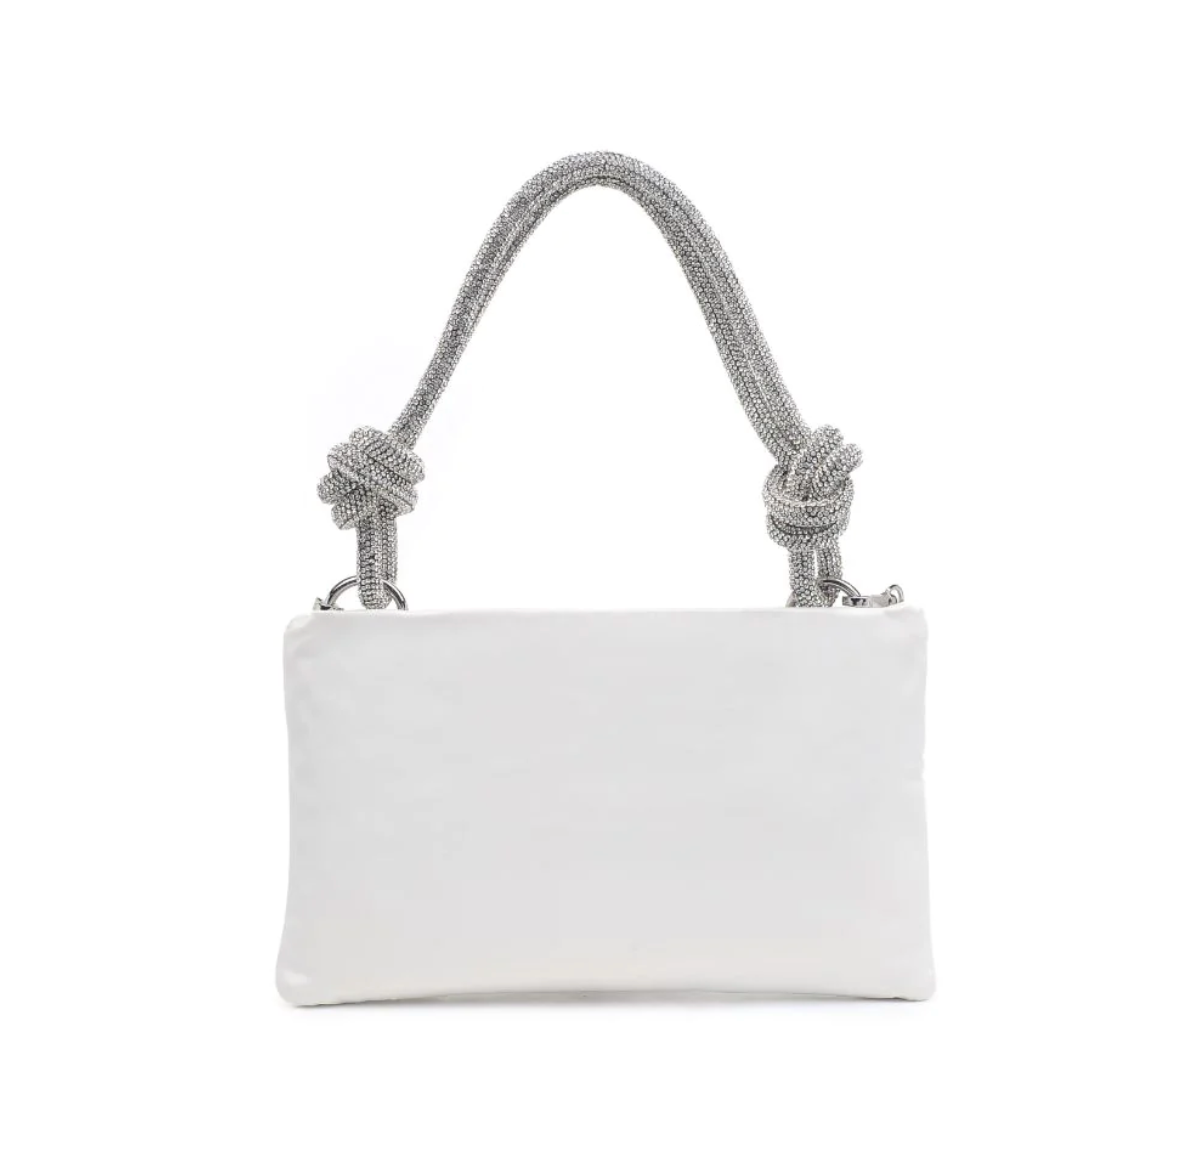 VALKYRIE EVENING BAG IN WHITE